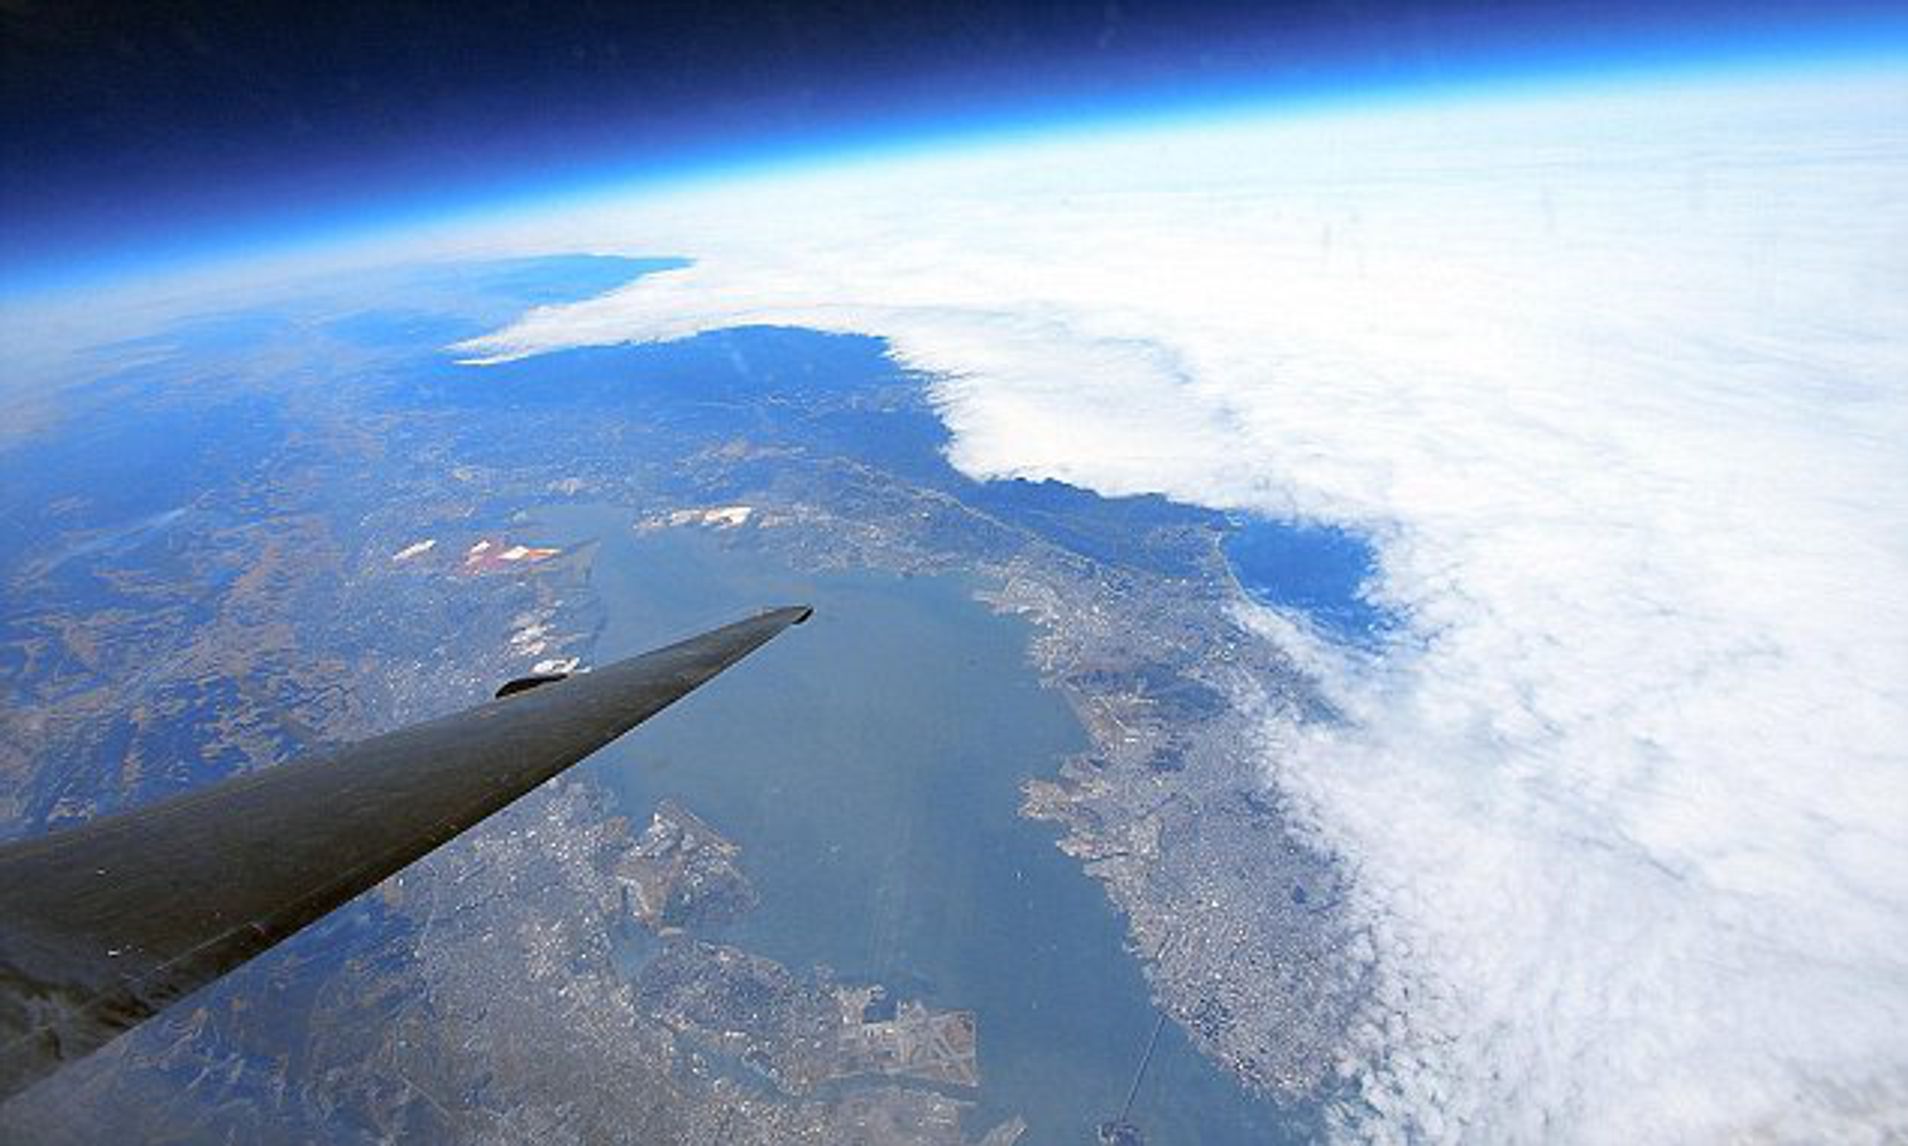 Photographer Christopher Michel Riding In U 2 Spy Plane Captures Image 13 Miles Above Earth. Daily Mail Online